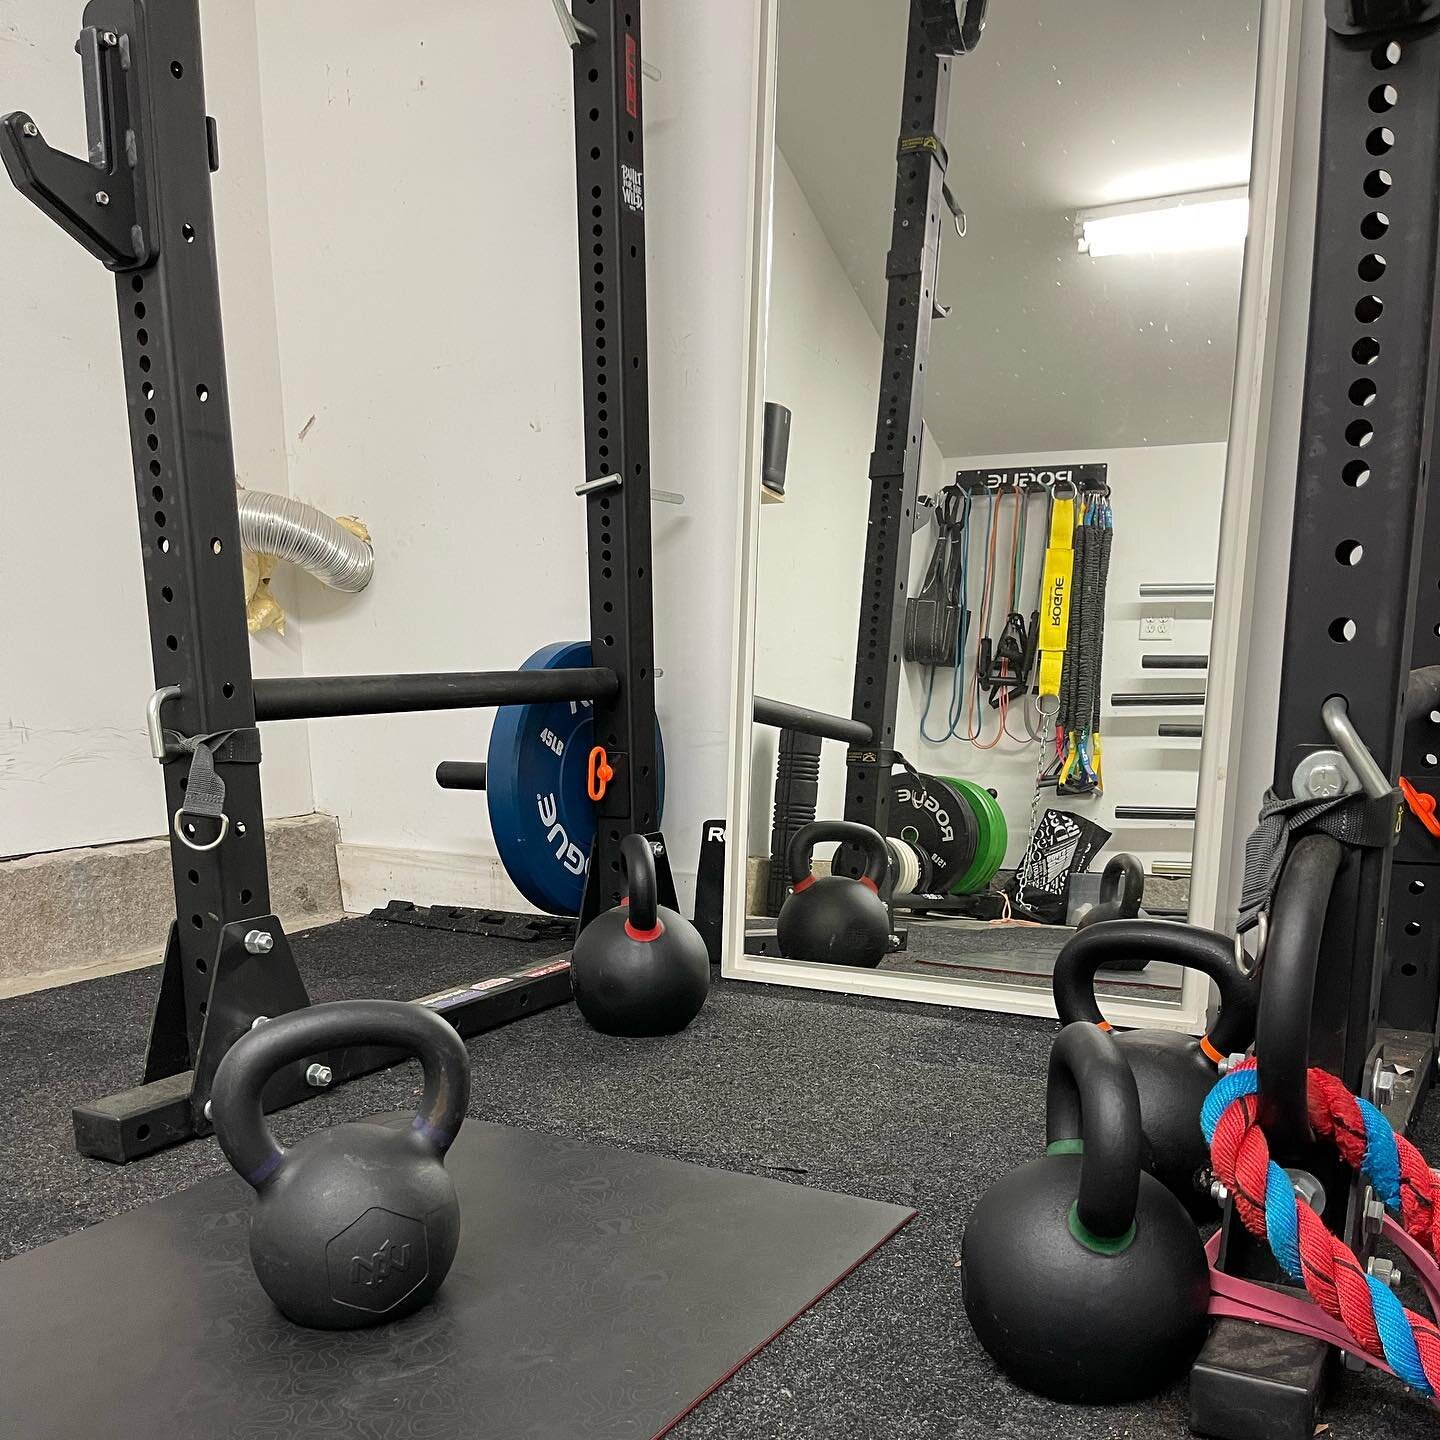 Rinse and repeat with moderate intensity daily. Anything you want get good at requires daily repeated action. Thank you to @kettlebellgrant and @richbihl for excellent coaching toward weekly results